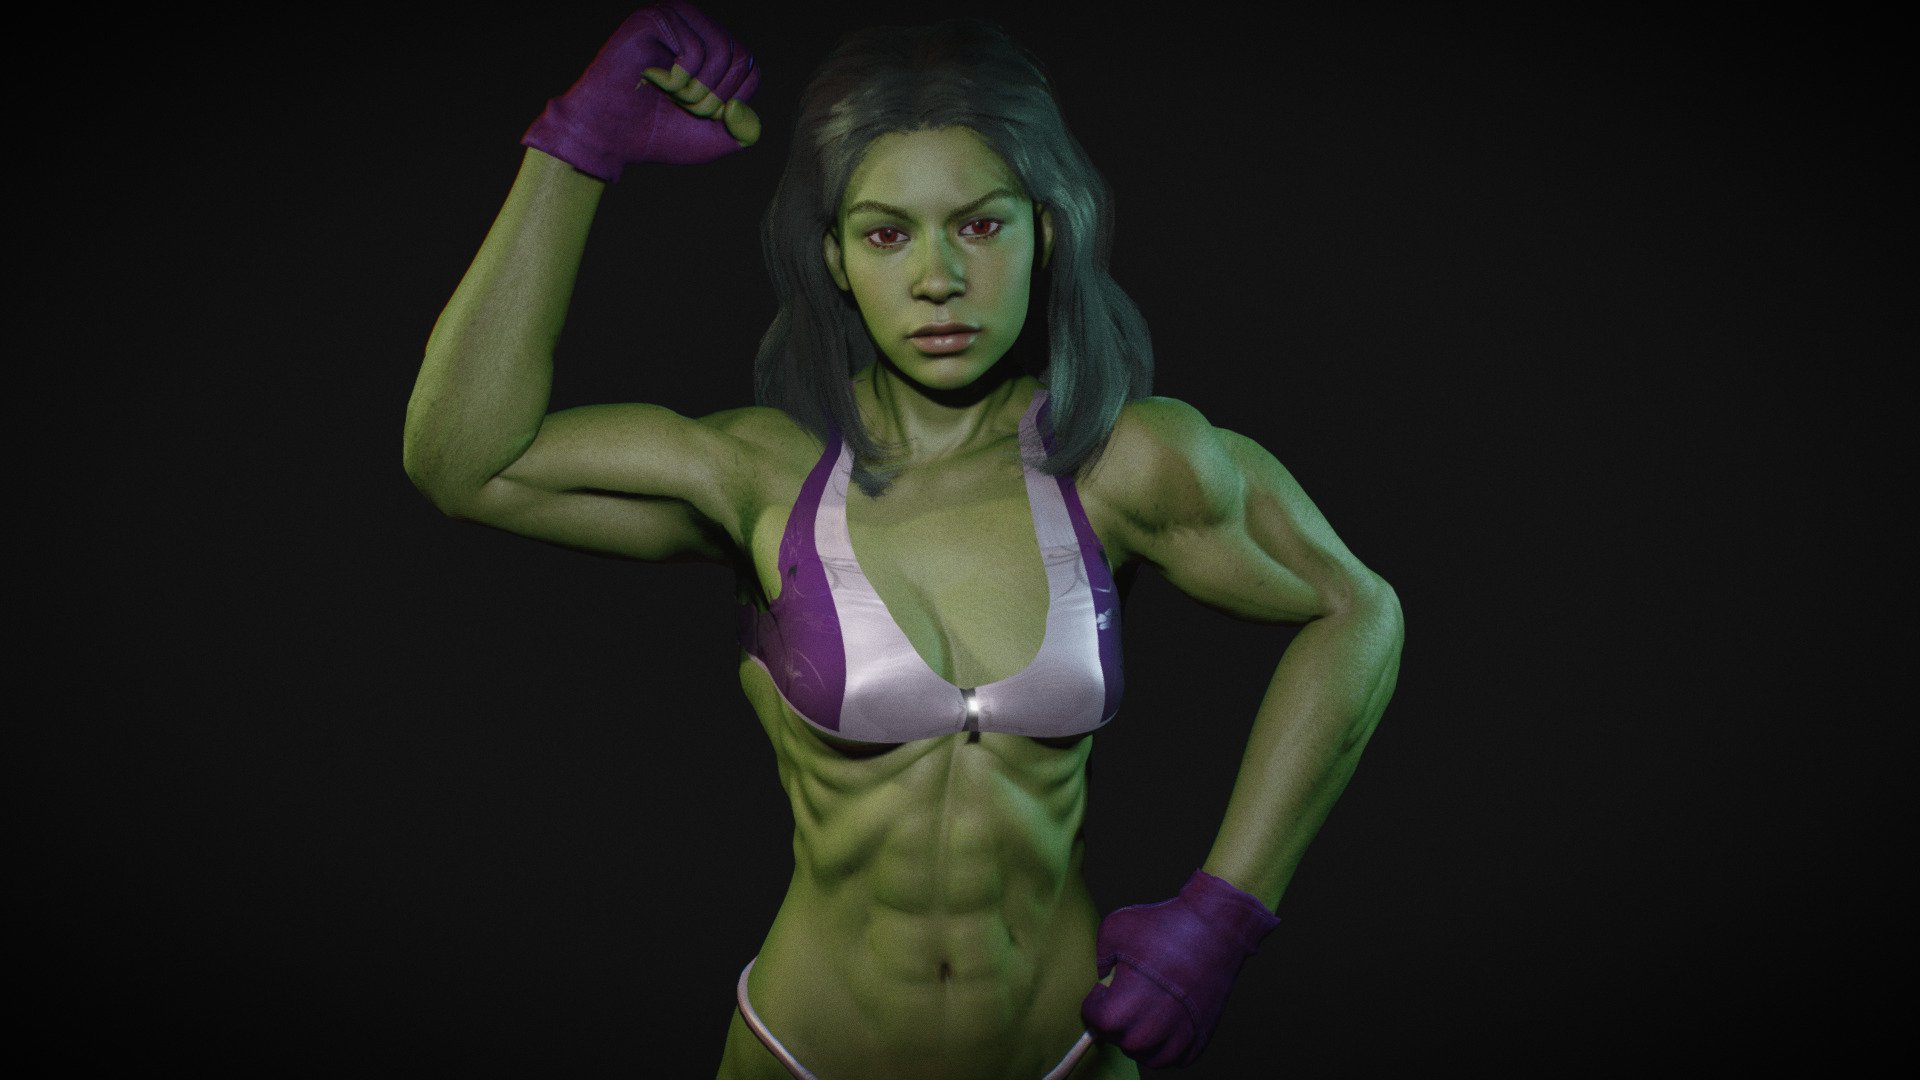 Female She Hulk cosplay Girl , includes 1 more shapekey for body muscles extremely toned/buffed. Model in Blender file. Fully rigged. SSS subsurface scattering. mixamo bone names for animation. No FBX or OBJ format, only Blend file 3d model